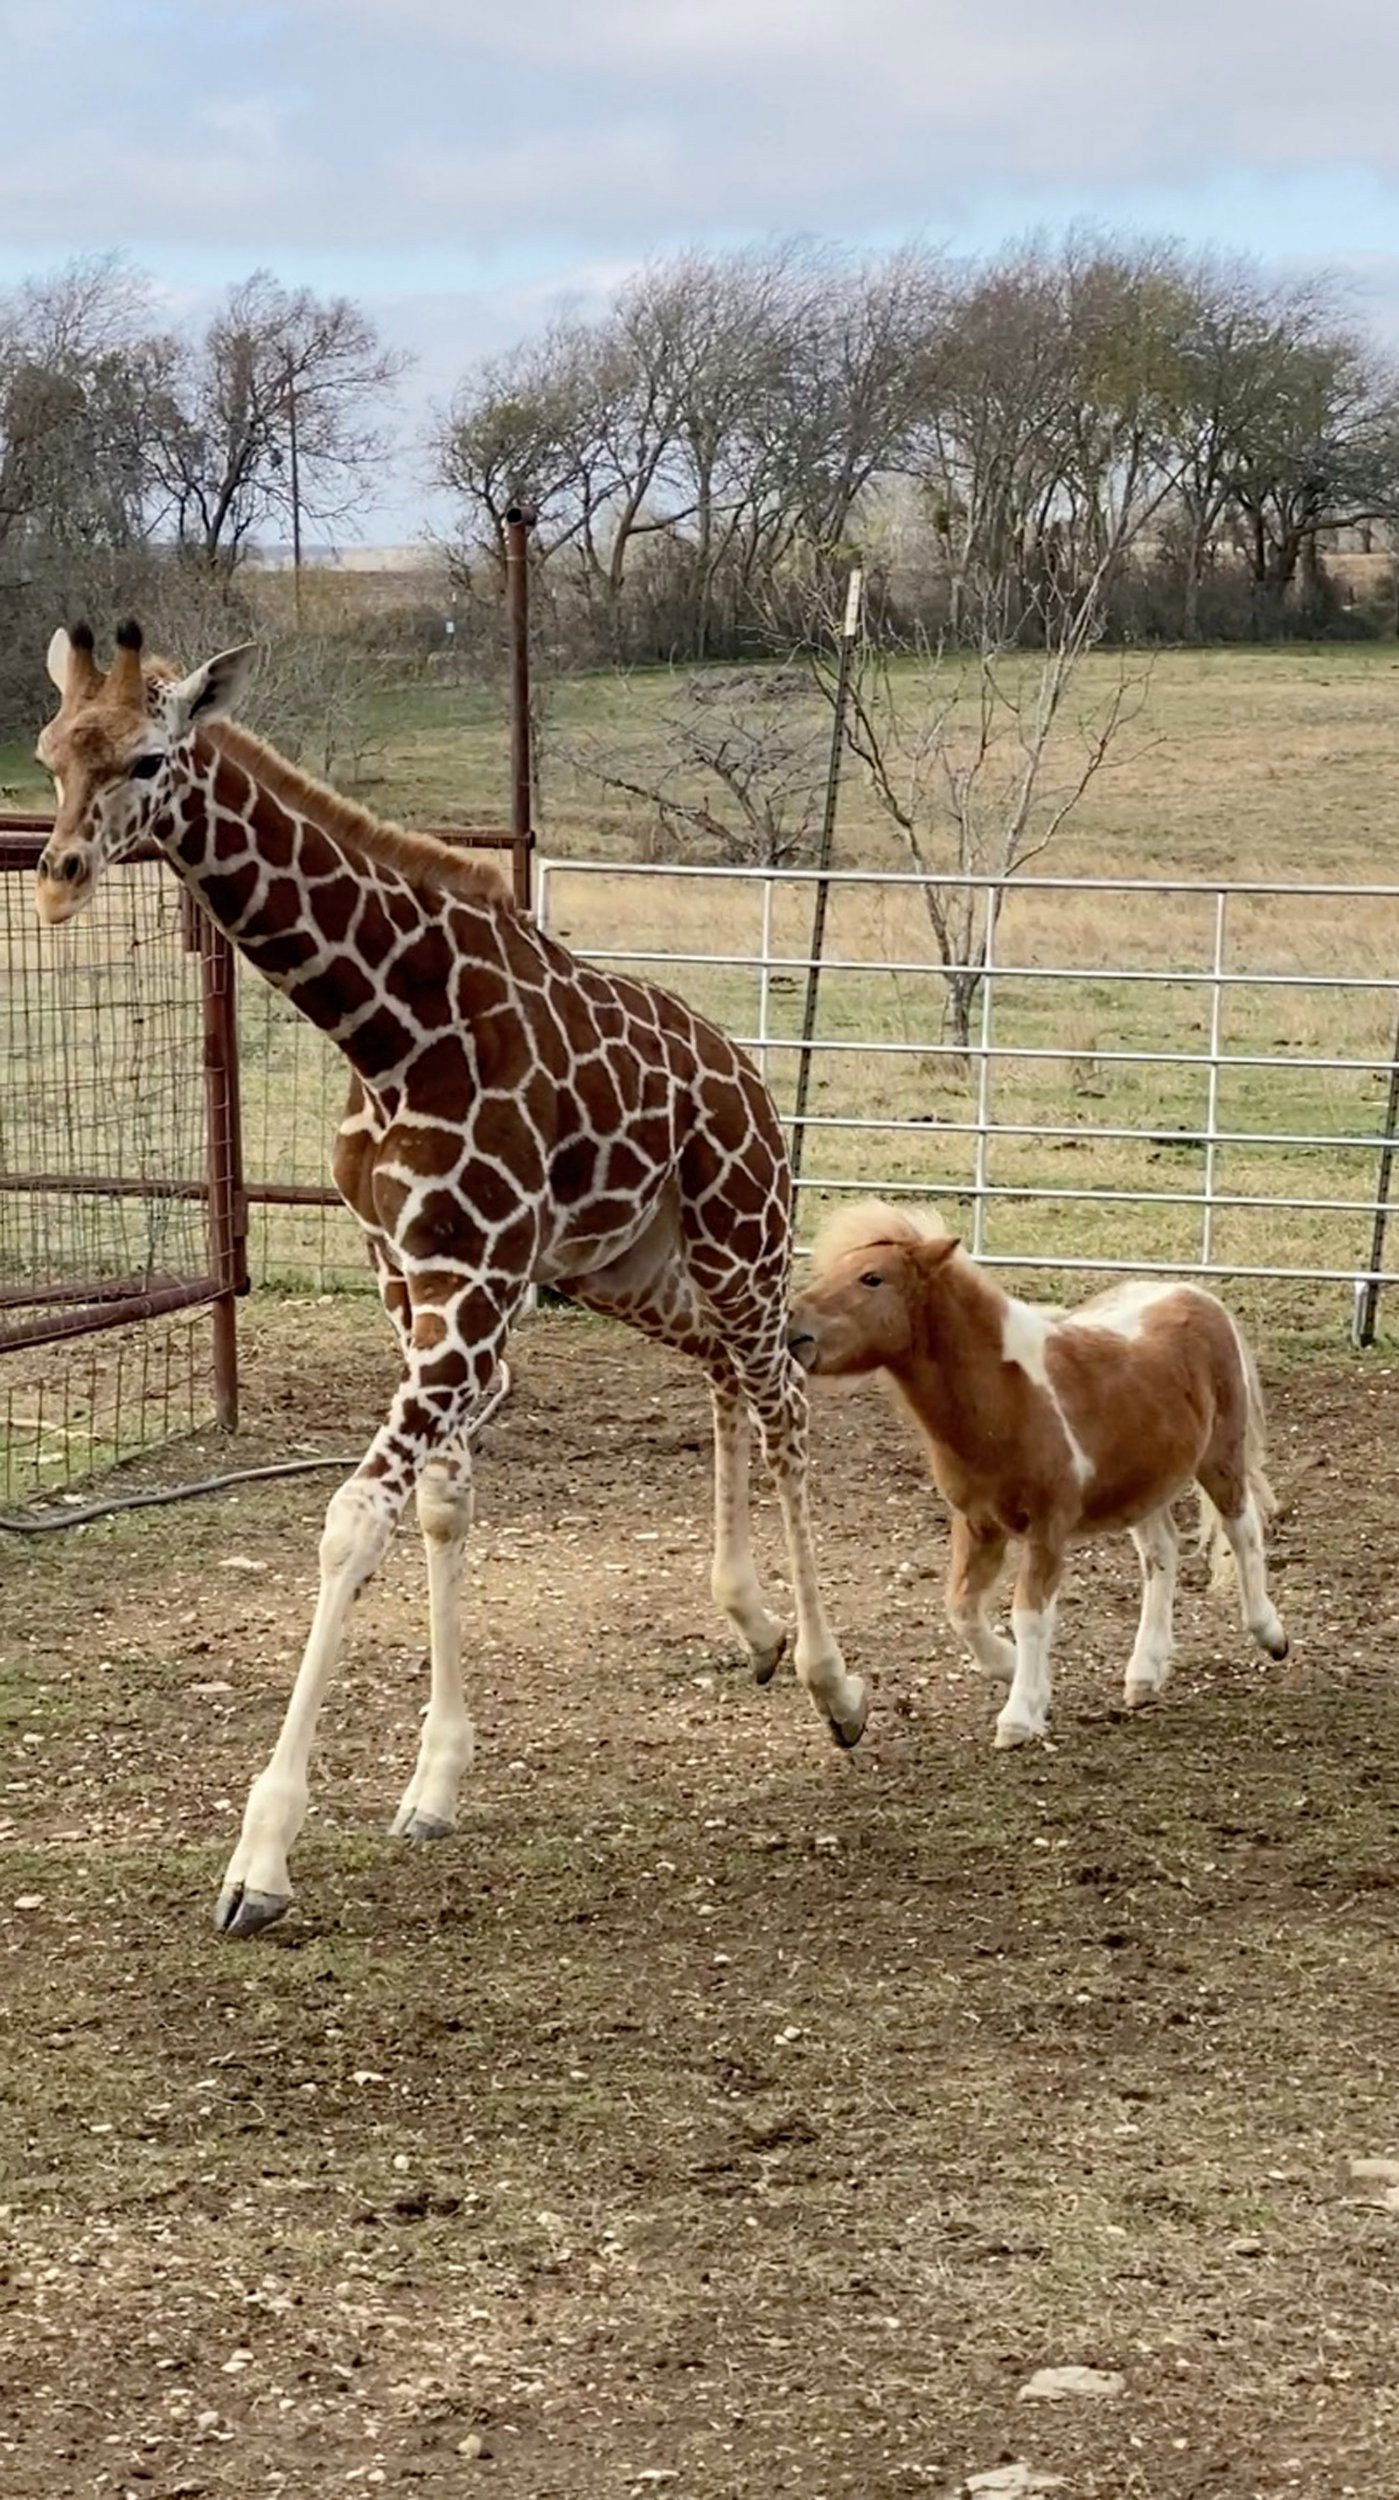 Giraffe and tiny horse become best friends who do everything together